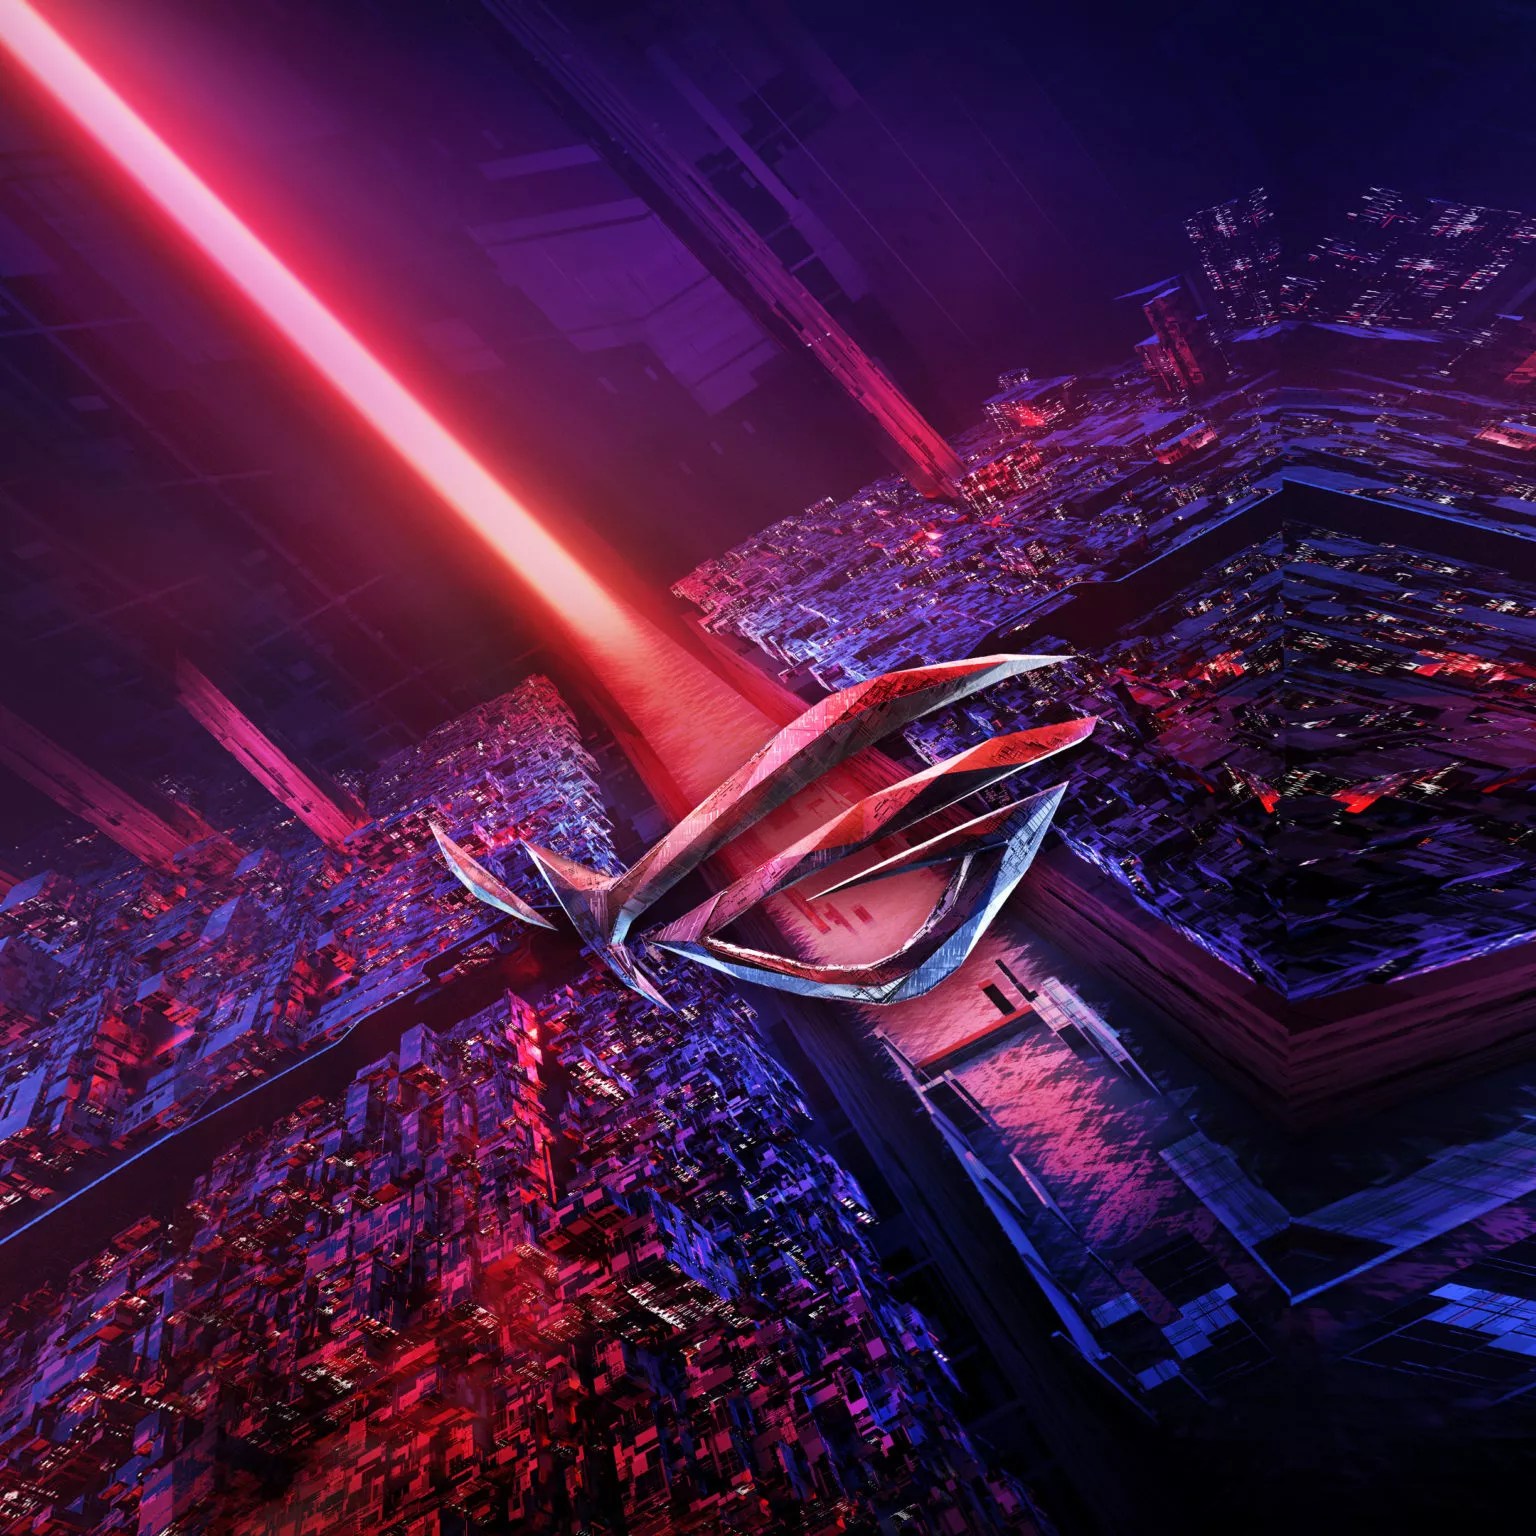 Check out the new cool wallpaper for Asus ROG Phone 6 here: Live wallpaper included